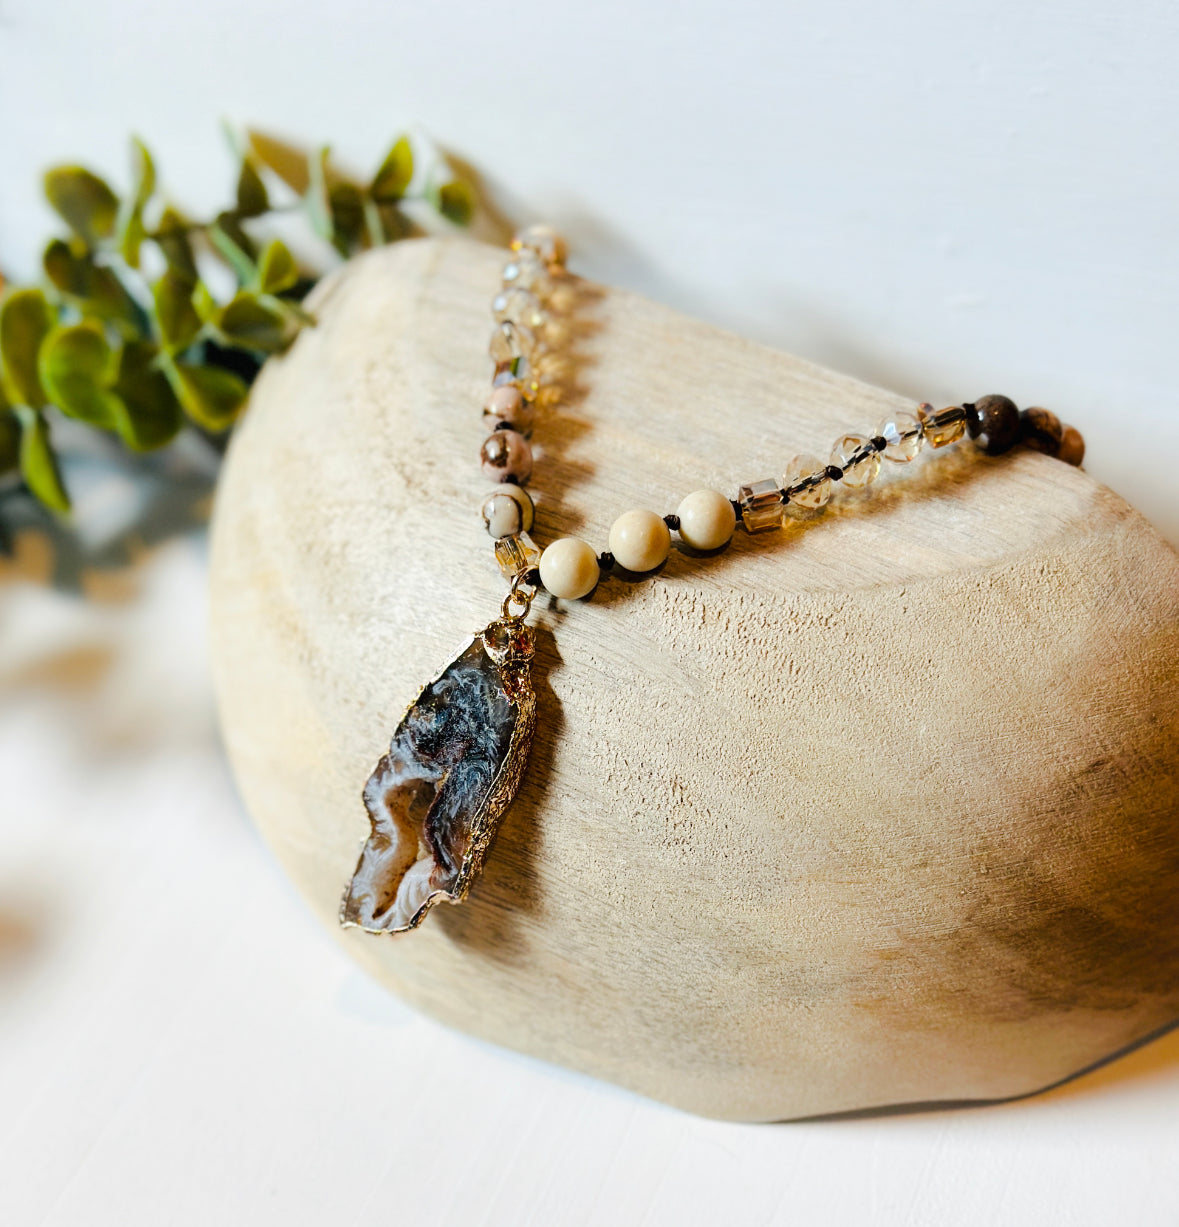 The Gaia Necklace